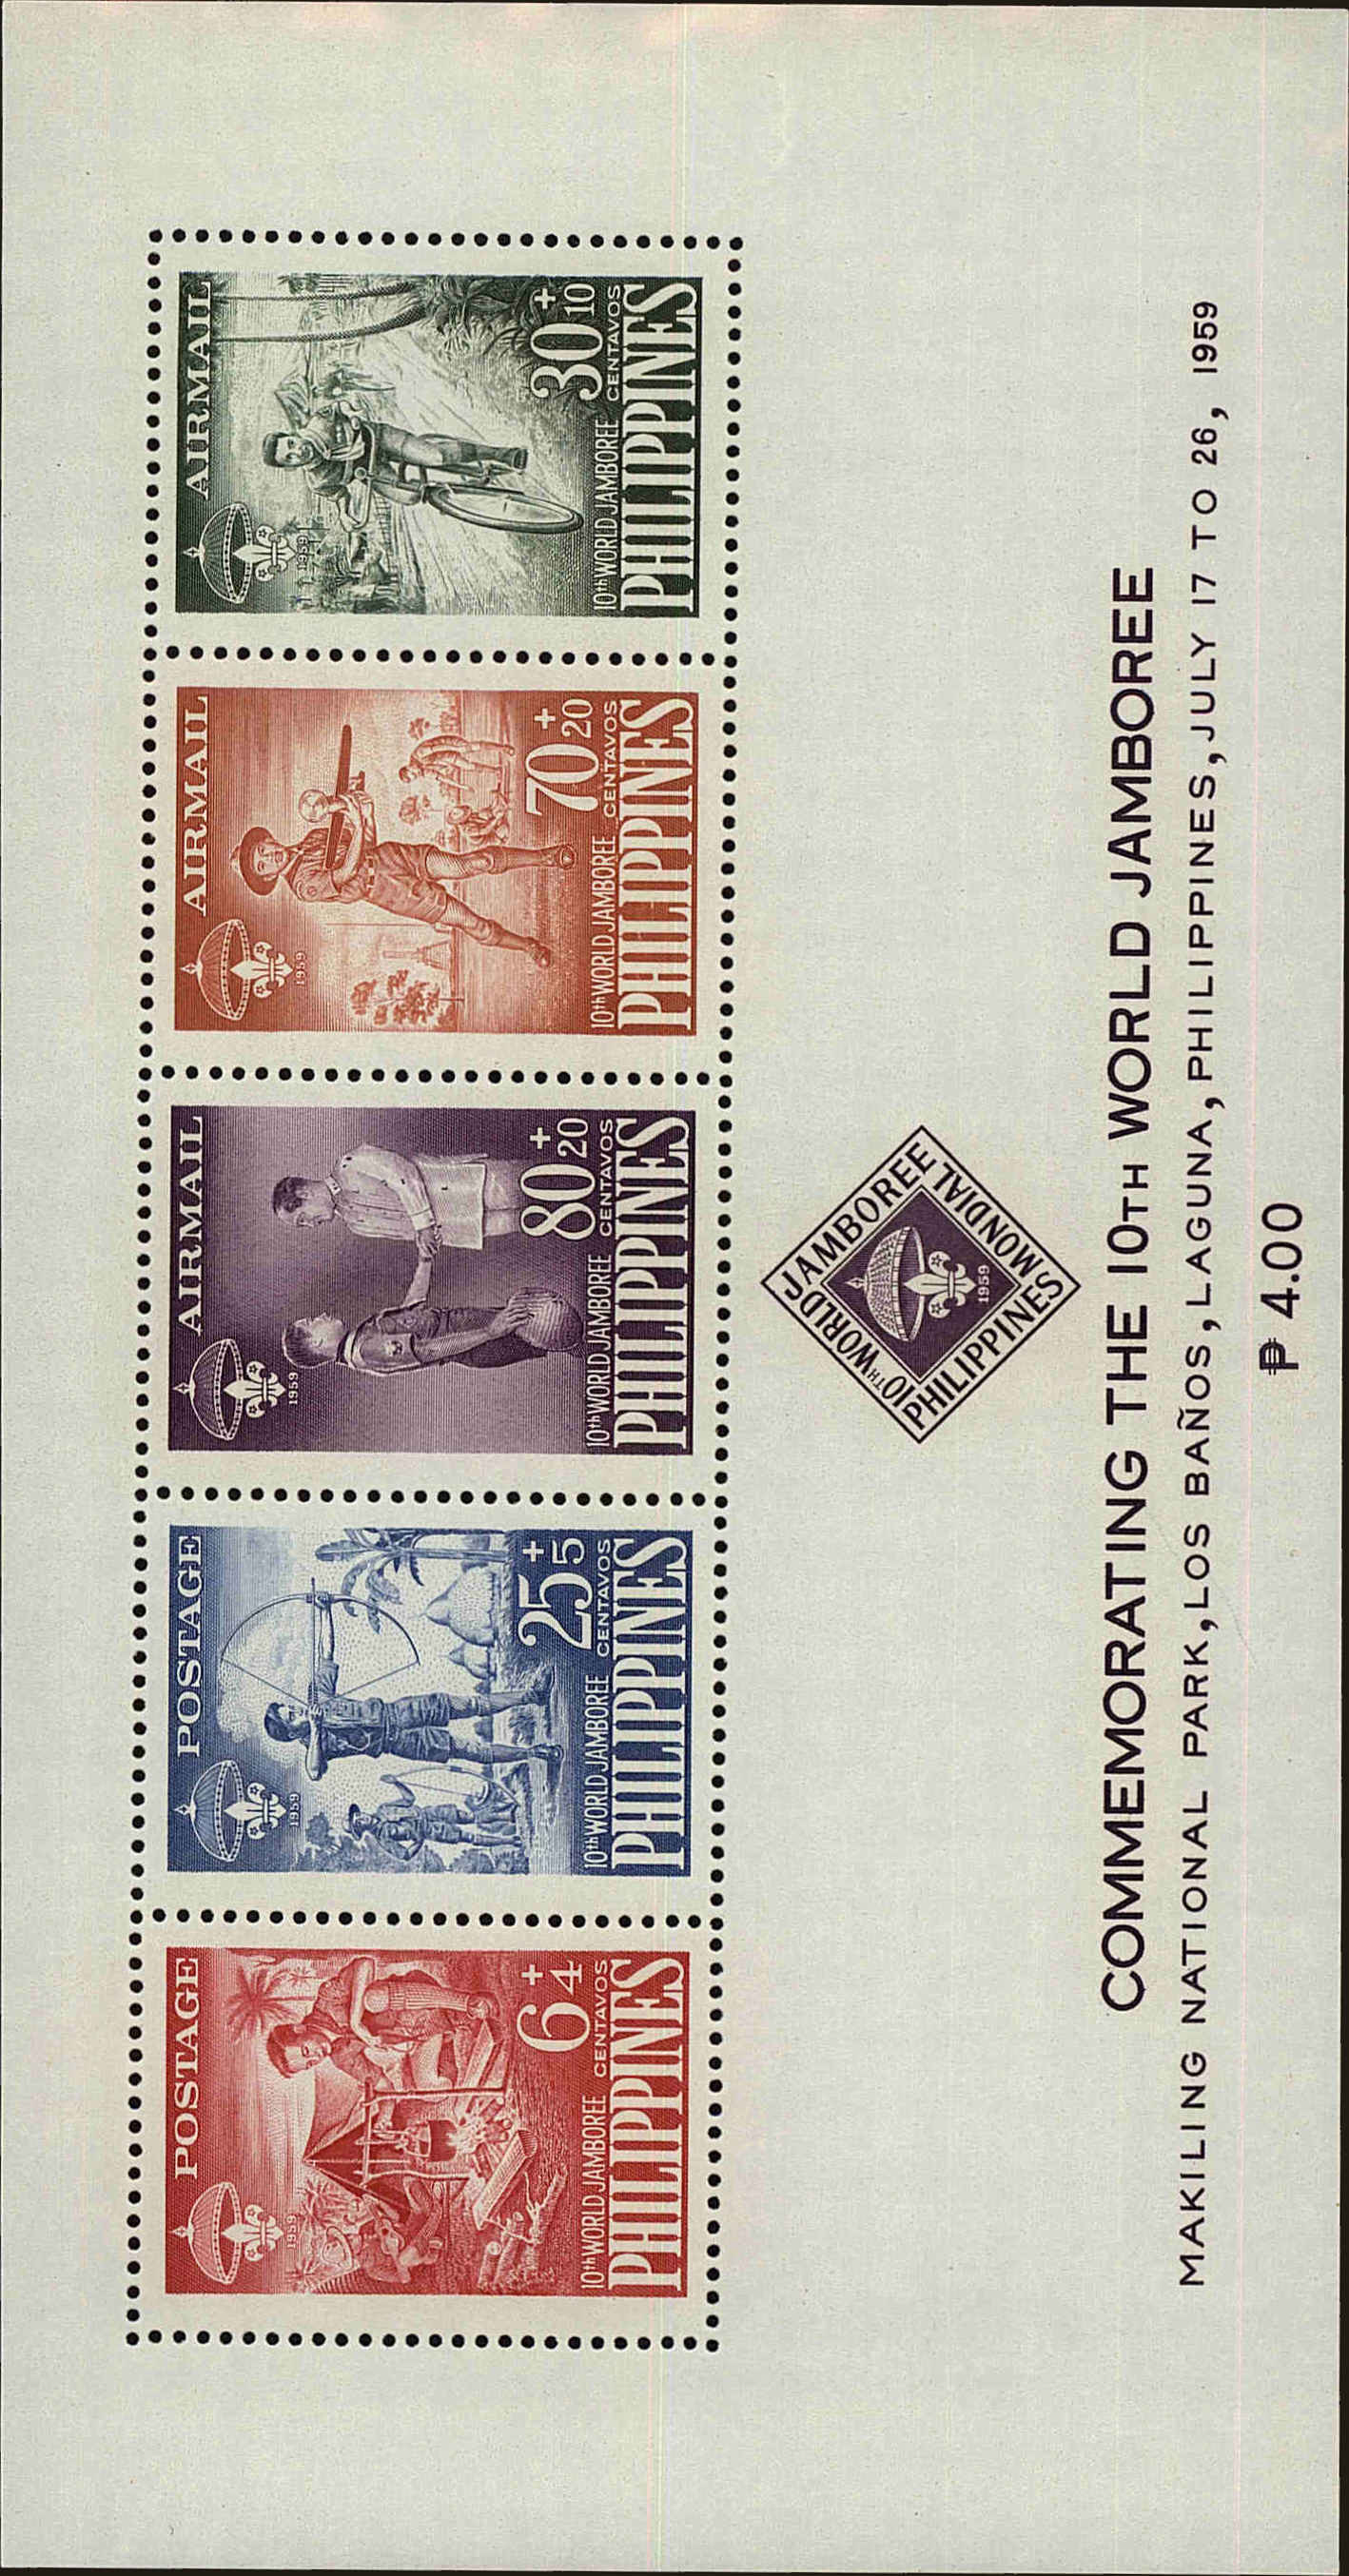 Front view of Philippines (US) CB3a collectors stamp